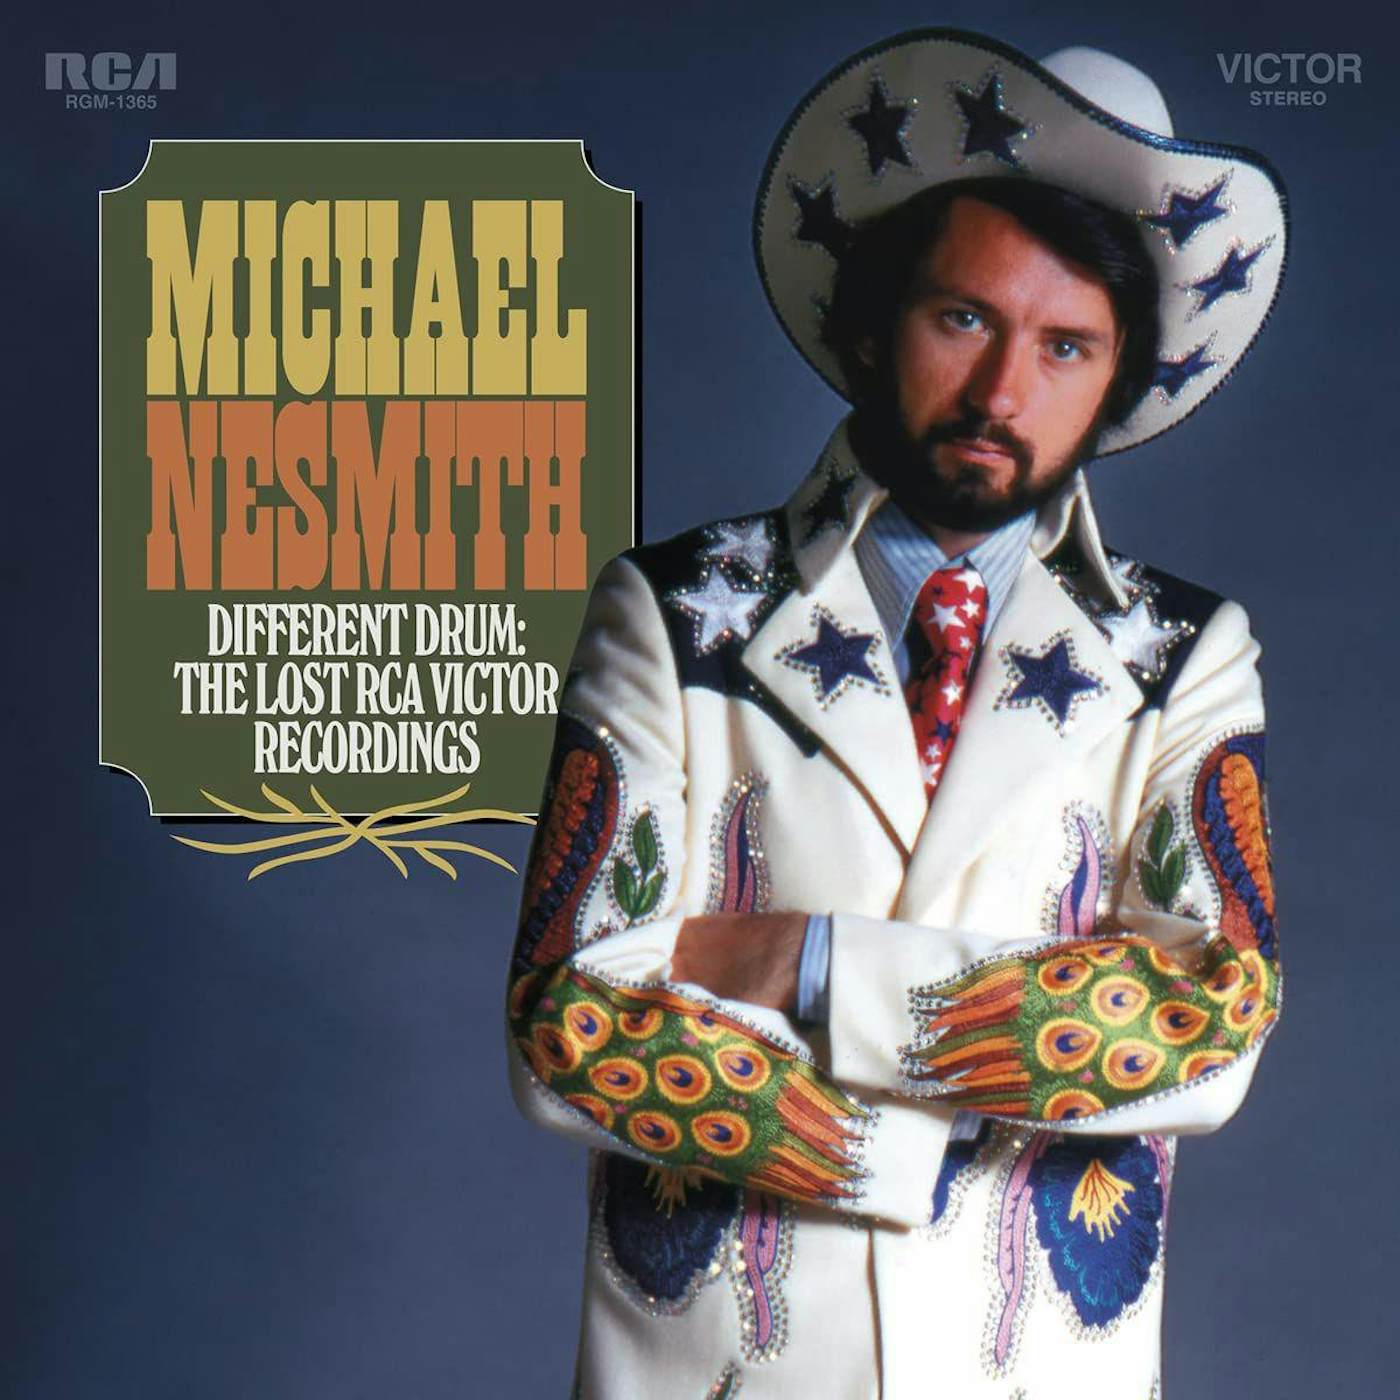 Michael Nesmith Different Drum--The Lost RCA Victor Recordings (Blue Smoke) Vinyl Record